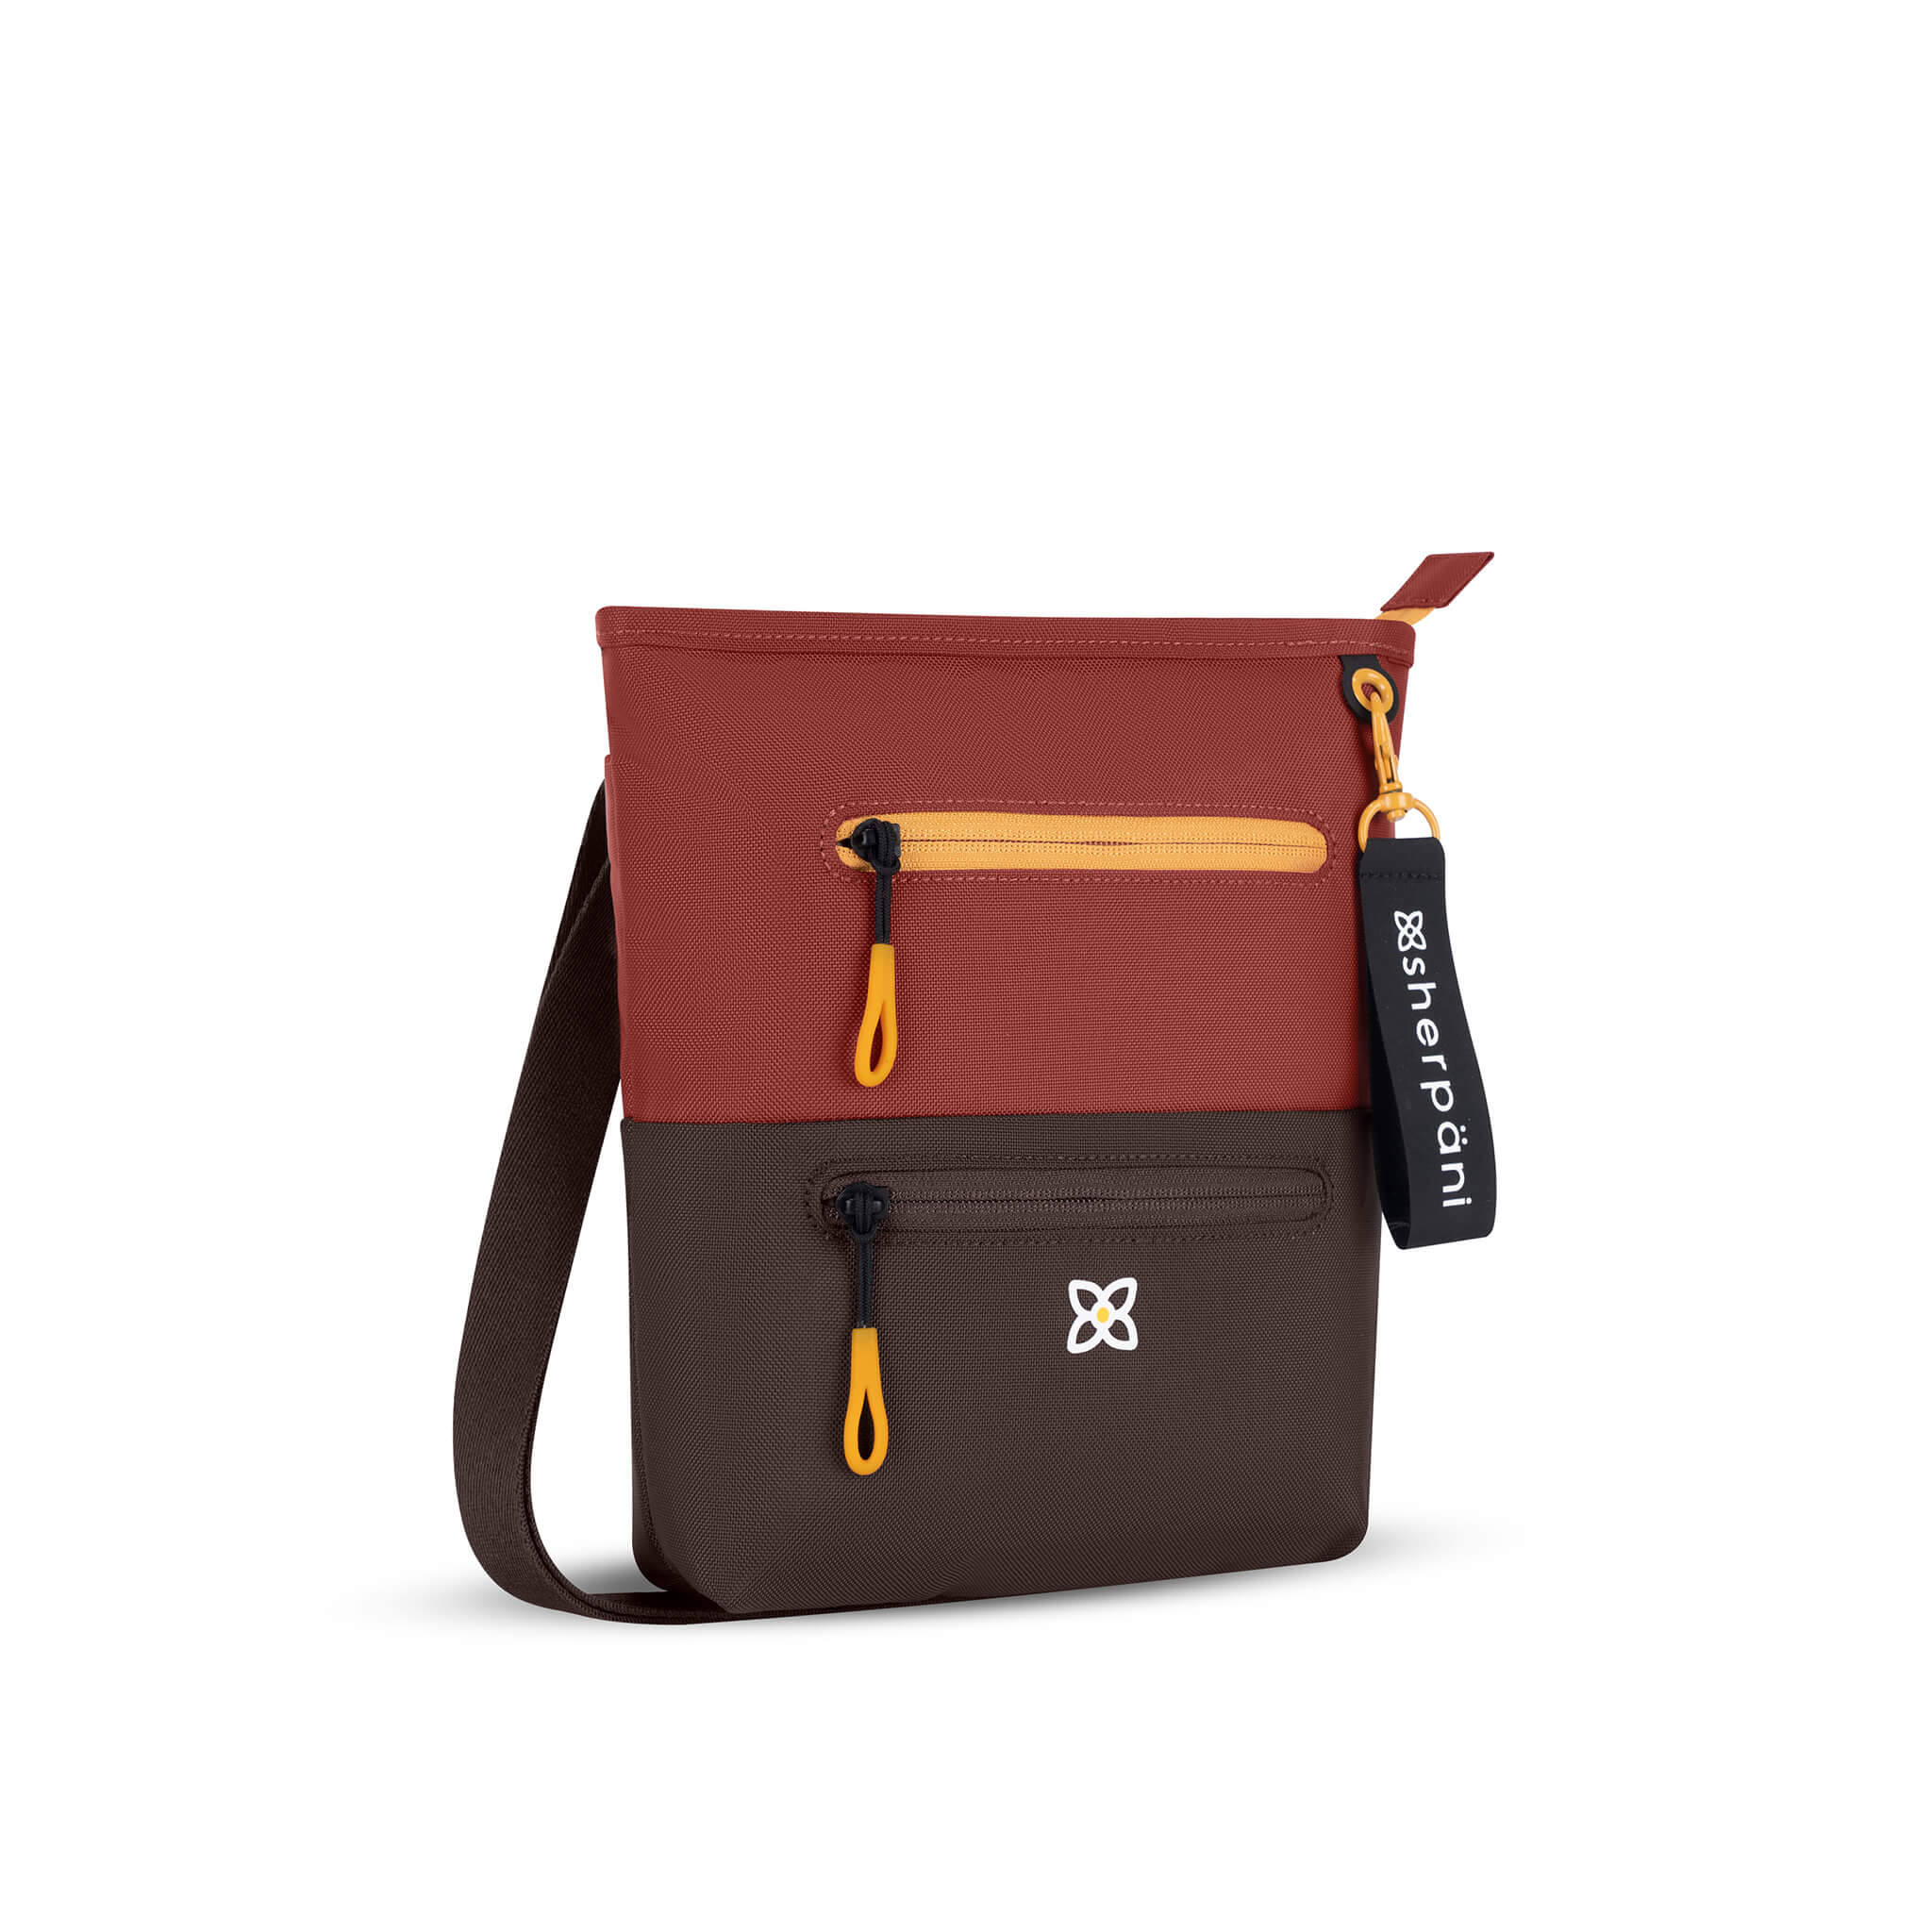 Angled front view of Sherpani crossbody travel bag, the Sadie in Cider. Sadie features include two front zipper pockets, a discrete side pocket, detachable keychain, adjustable crossbody strap, back slip pocket and RFID blocking technology. The Cider color is two-toned in burgundy and dark brown with yellow accents. 